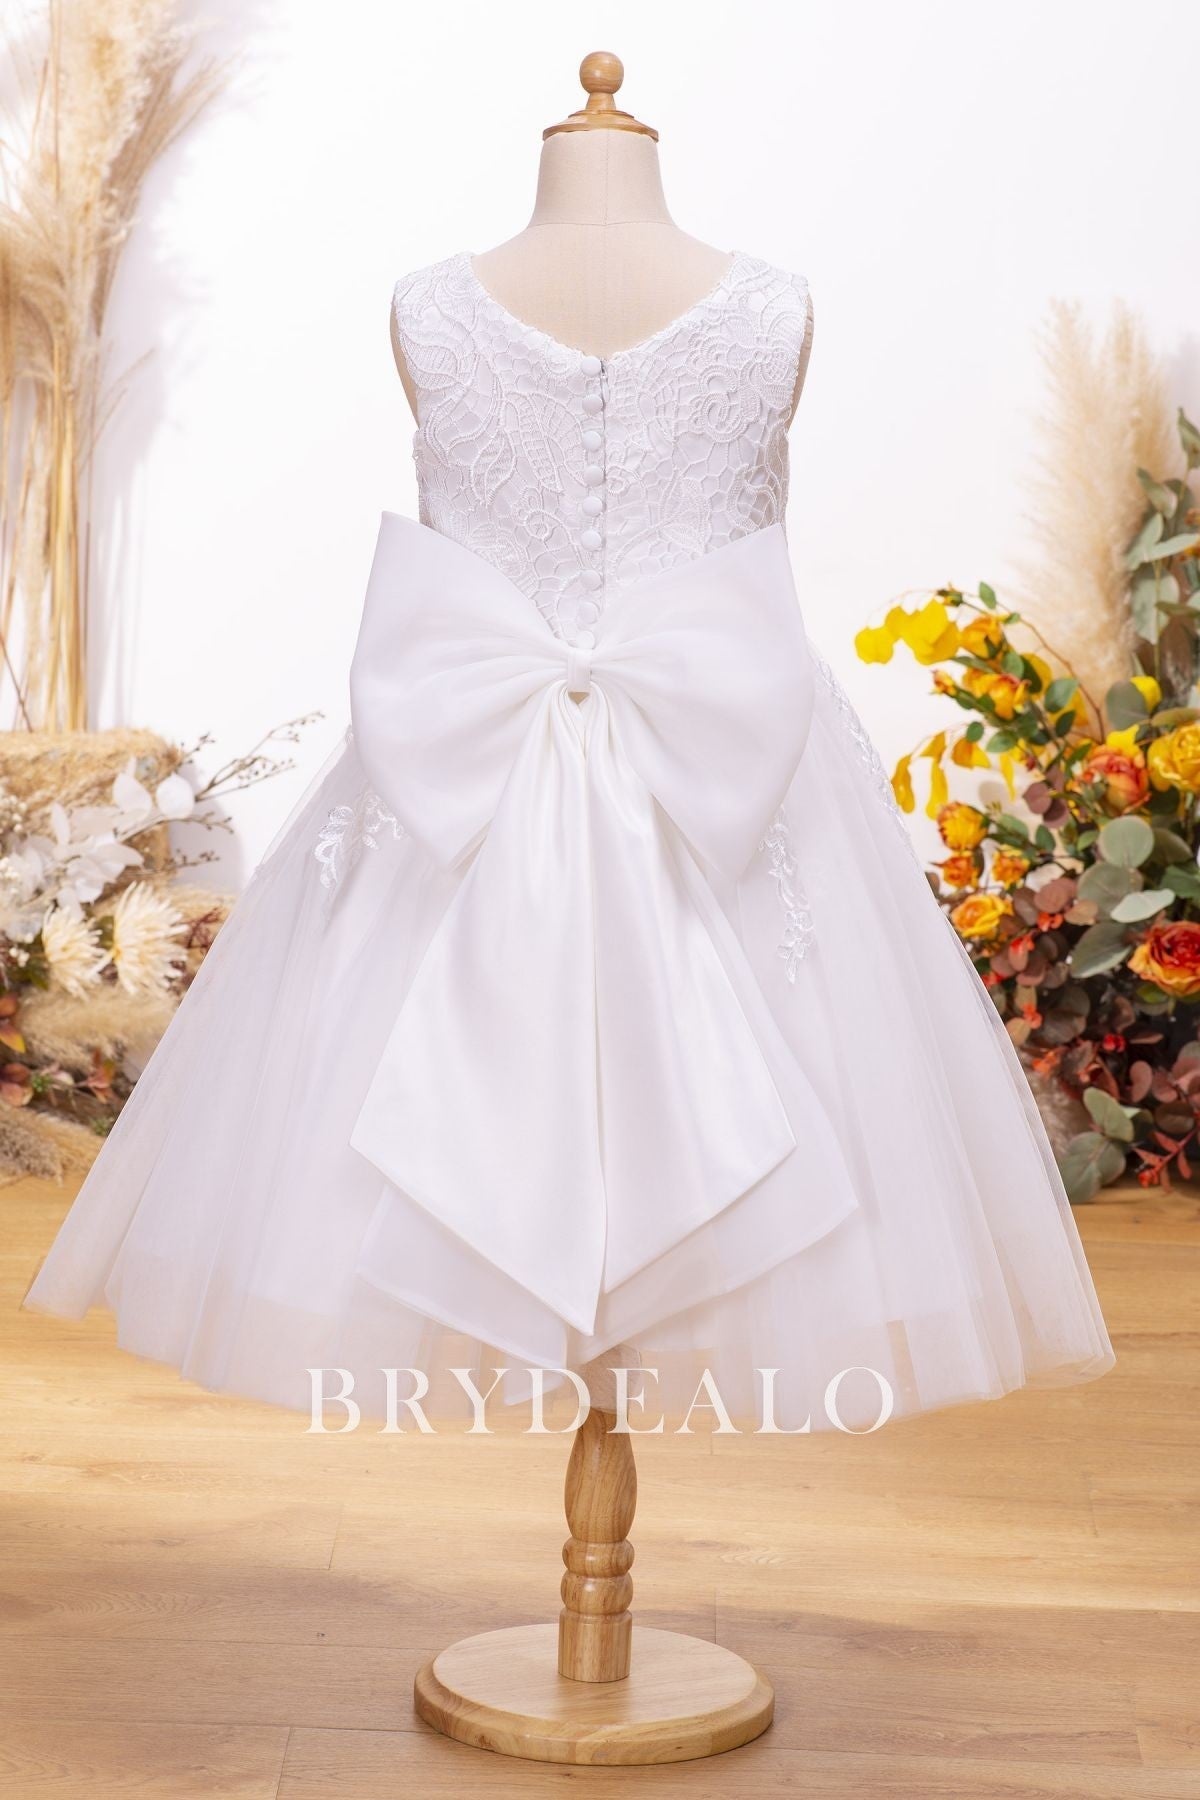 fashionable big bow lace tulle flower girl dress